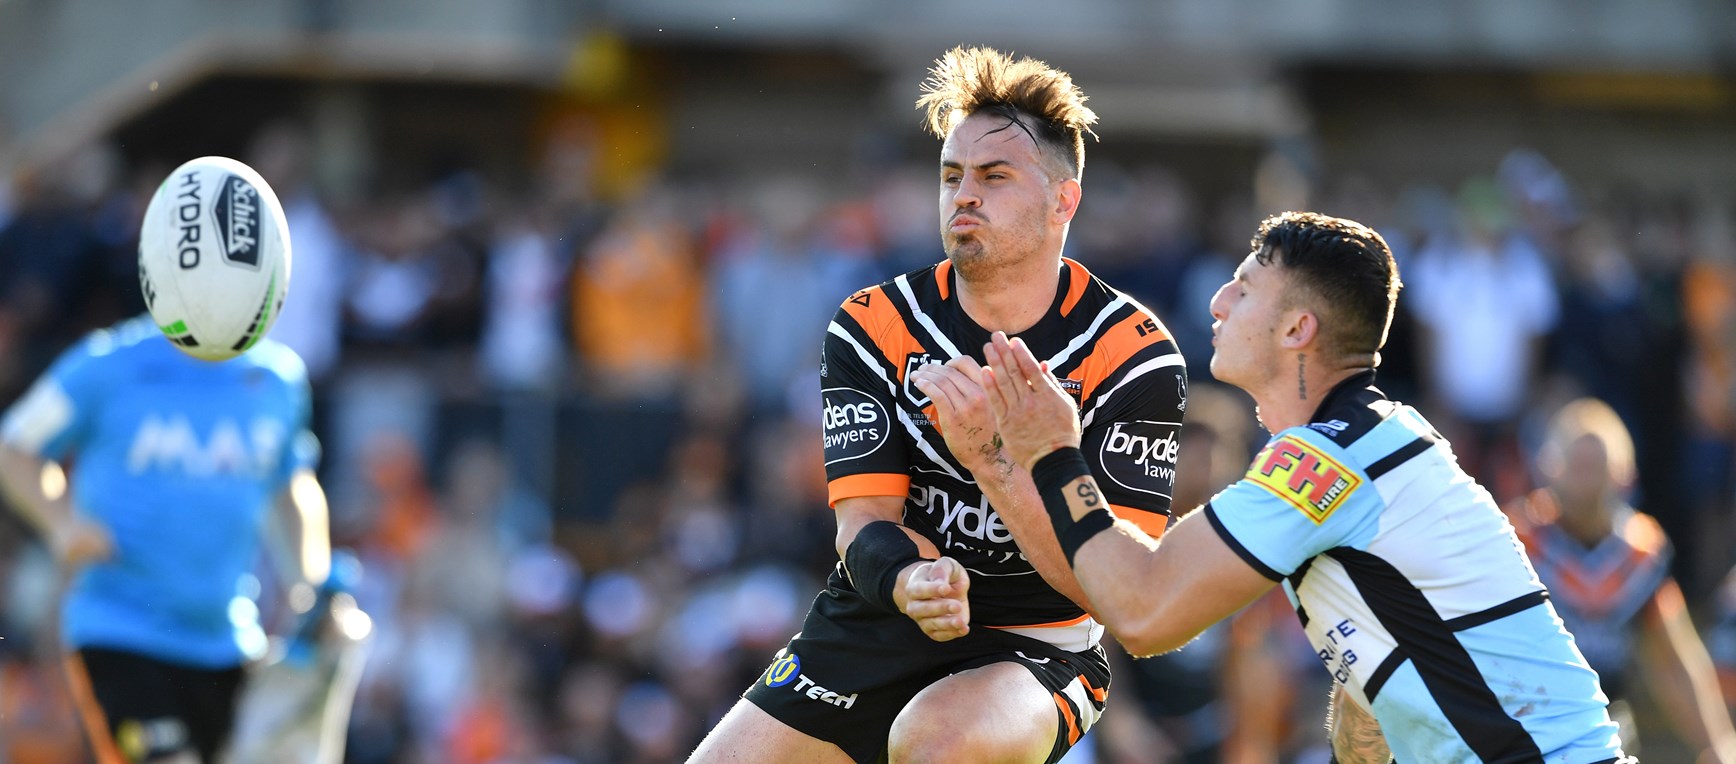 Best Wests Tigers photos of 2019